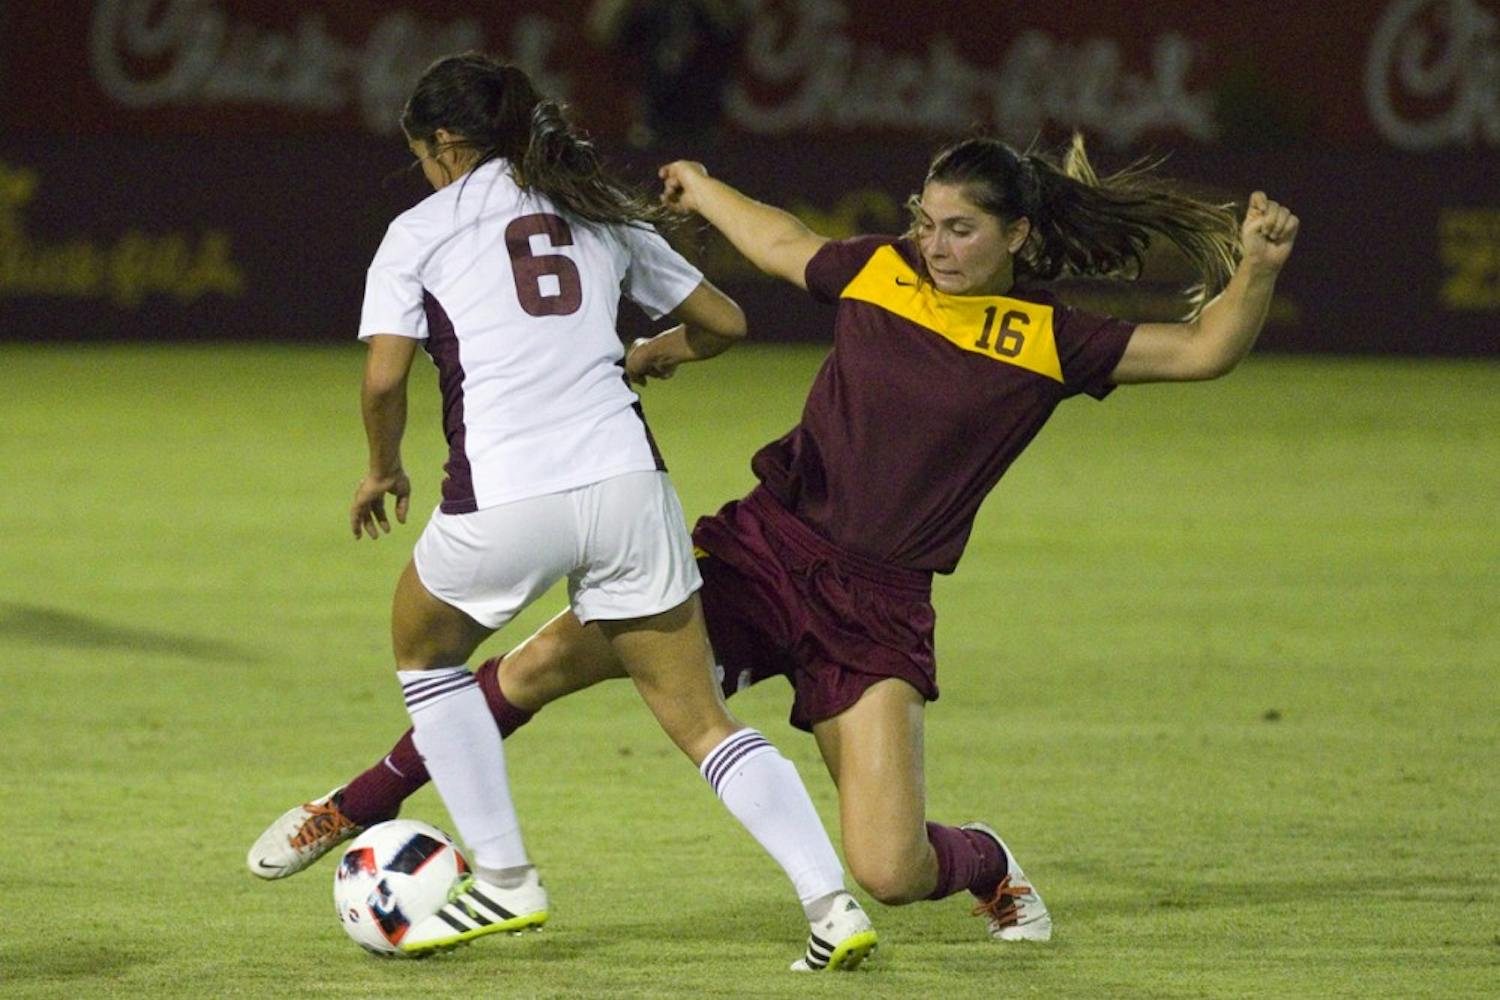 Sophomore midfielder Adriana Orozco dribbles around the slide tackle made by the Loyola Chicago midfielder in the 4-0 win against Loyola Chicago in Sun Devil Soccer Stadium in Tempe, Arizona, on Friday, August 26, 2016. Orozco added in the second goal of the night in the 29th minute.